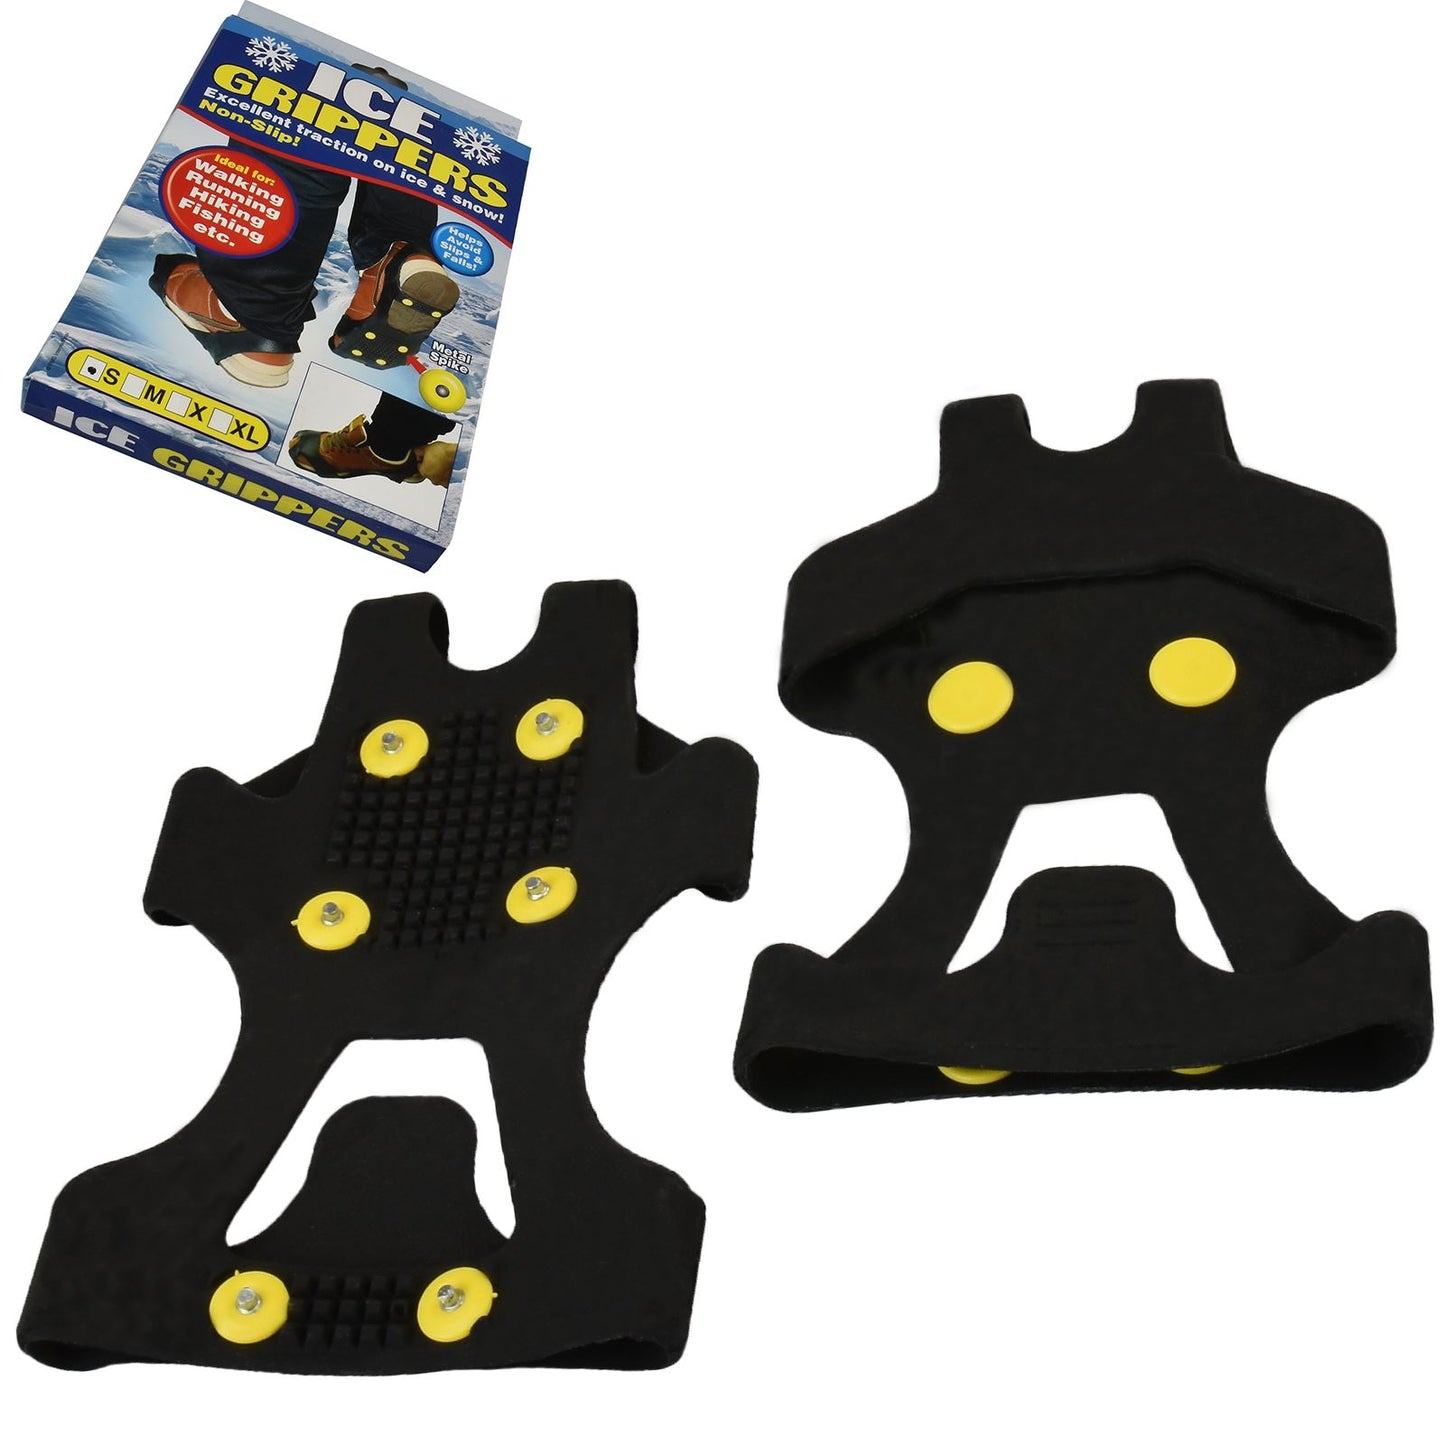 Stay Safe and Stable on Slippery Surfaces with Ice Grippers